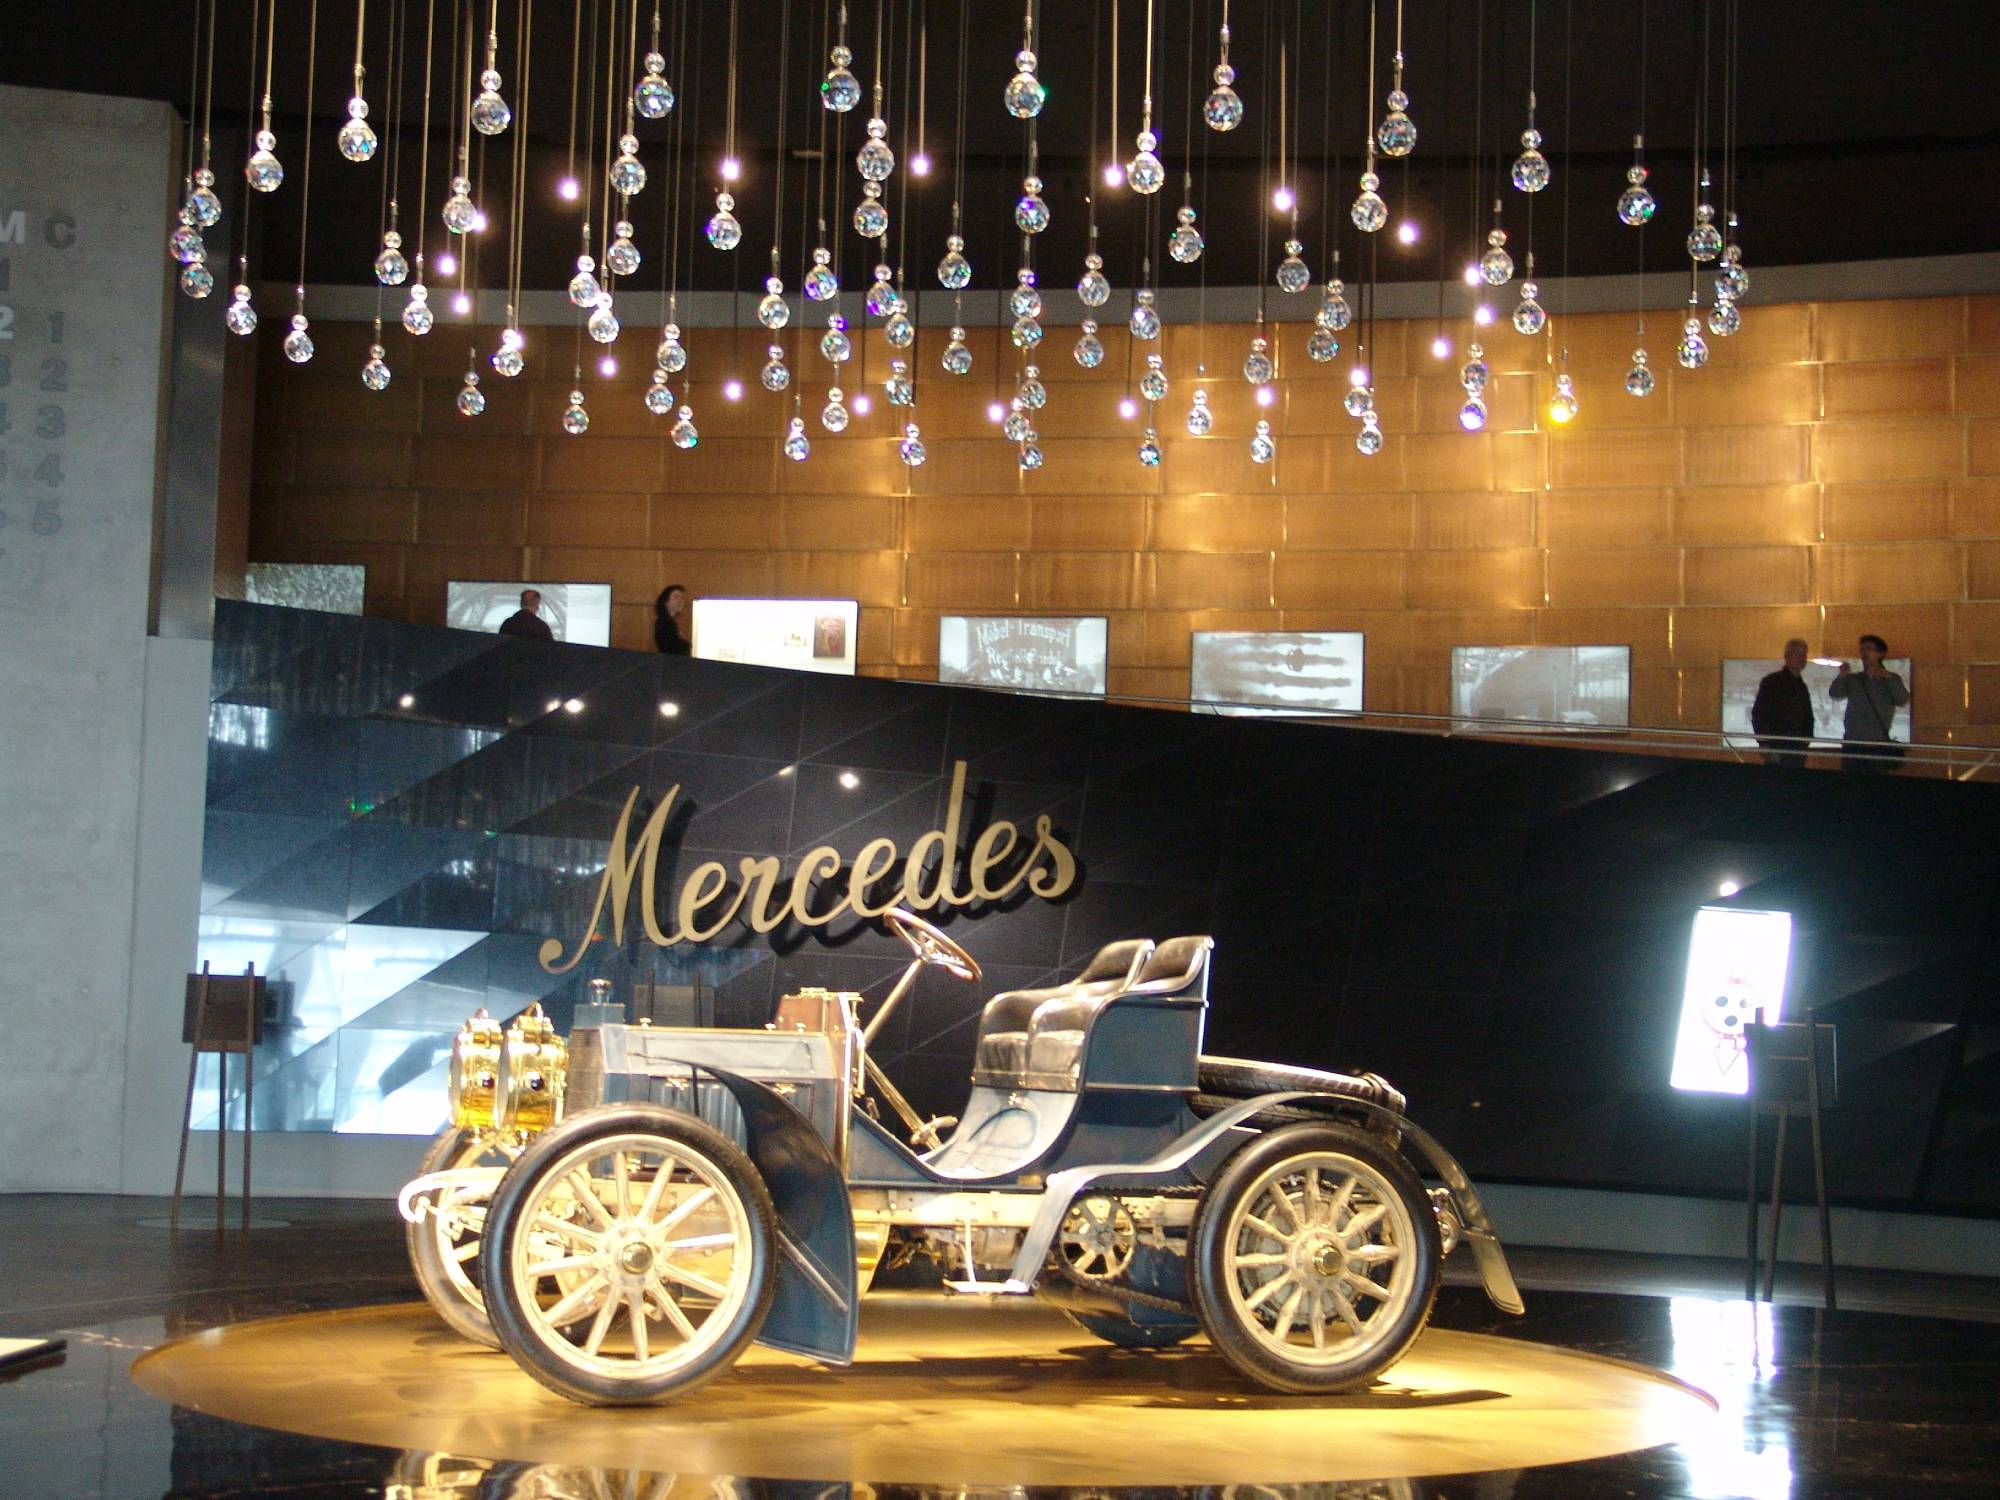 Learn about the history of autombiles at the Mercedes-Benz Museum |PassPorter.com